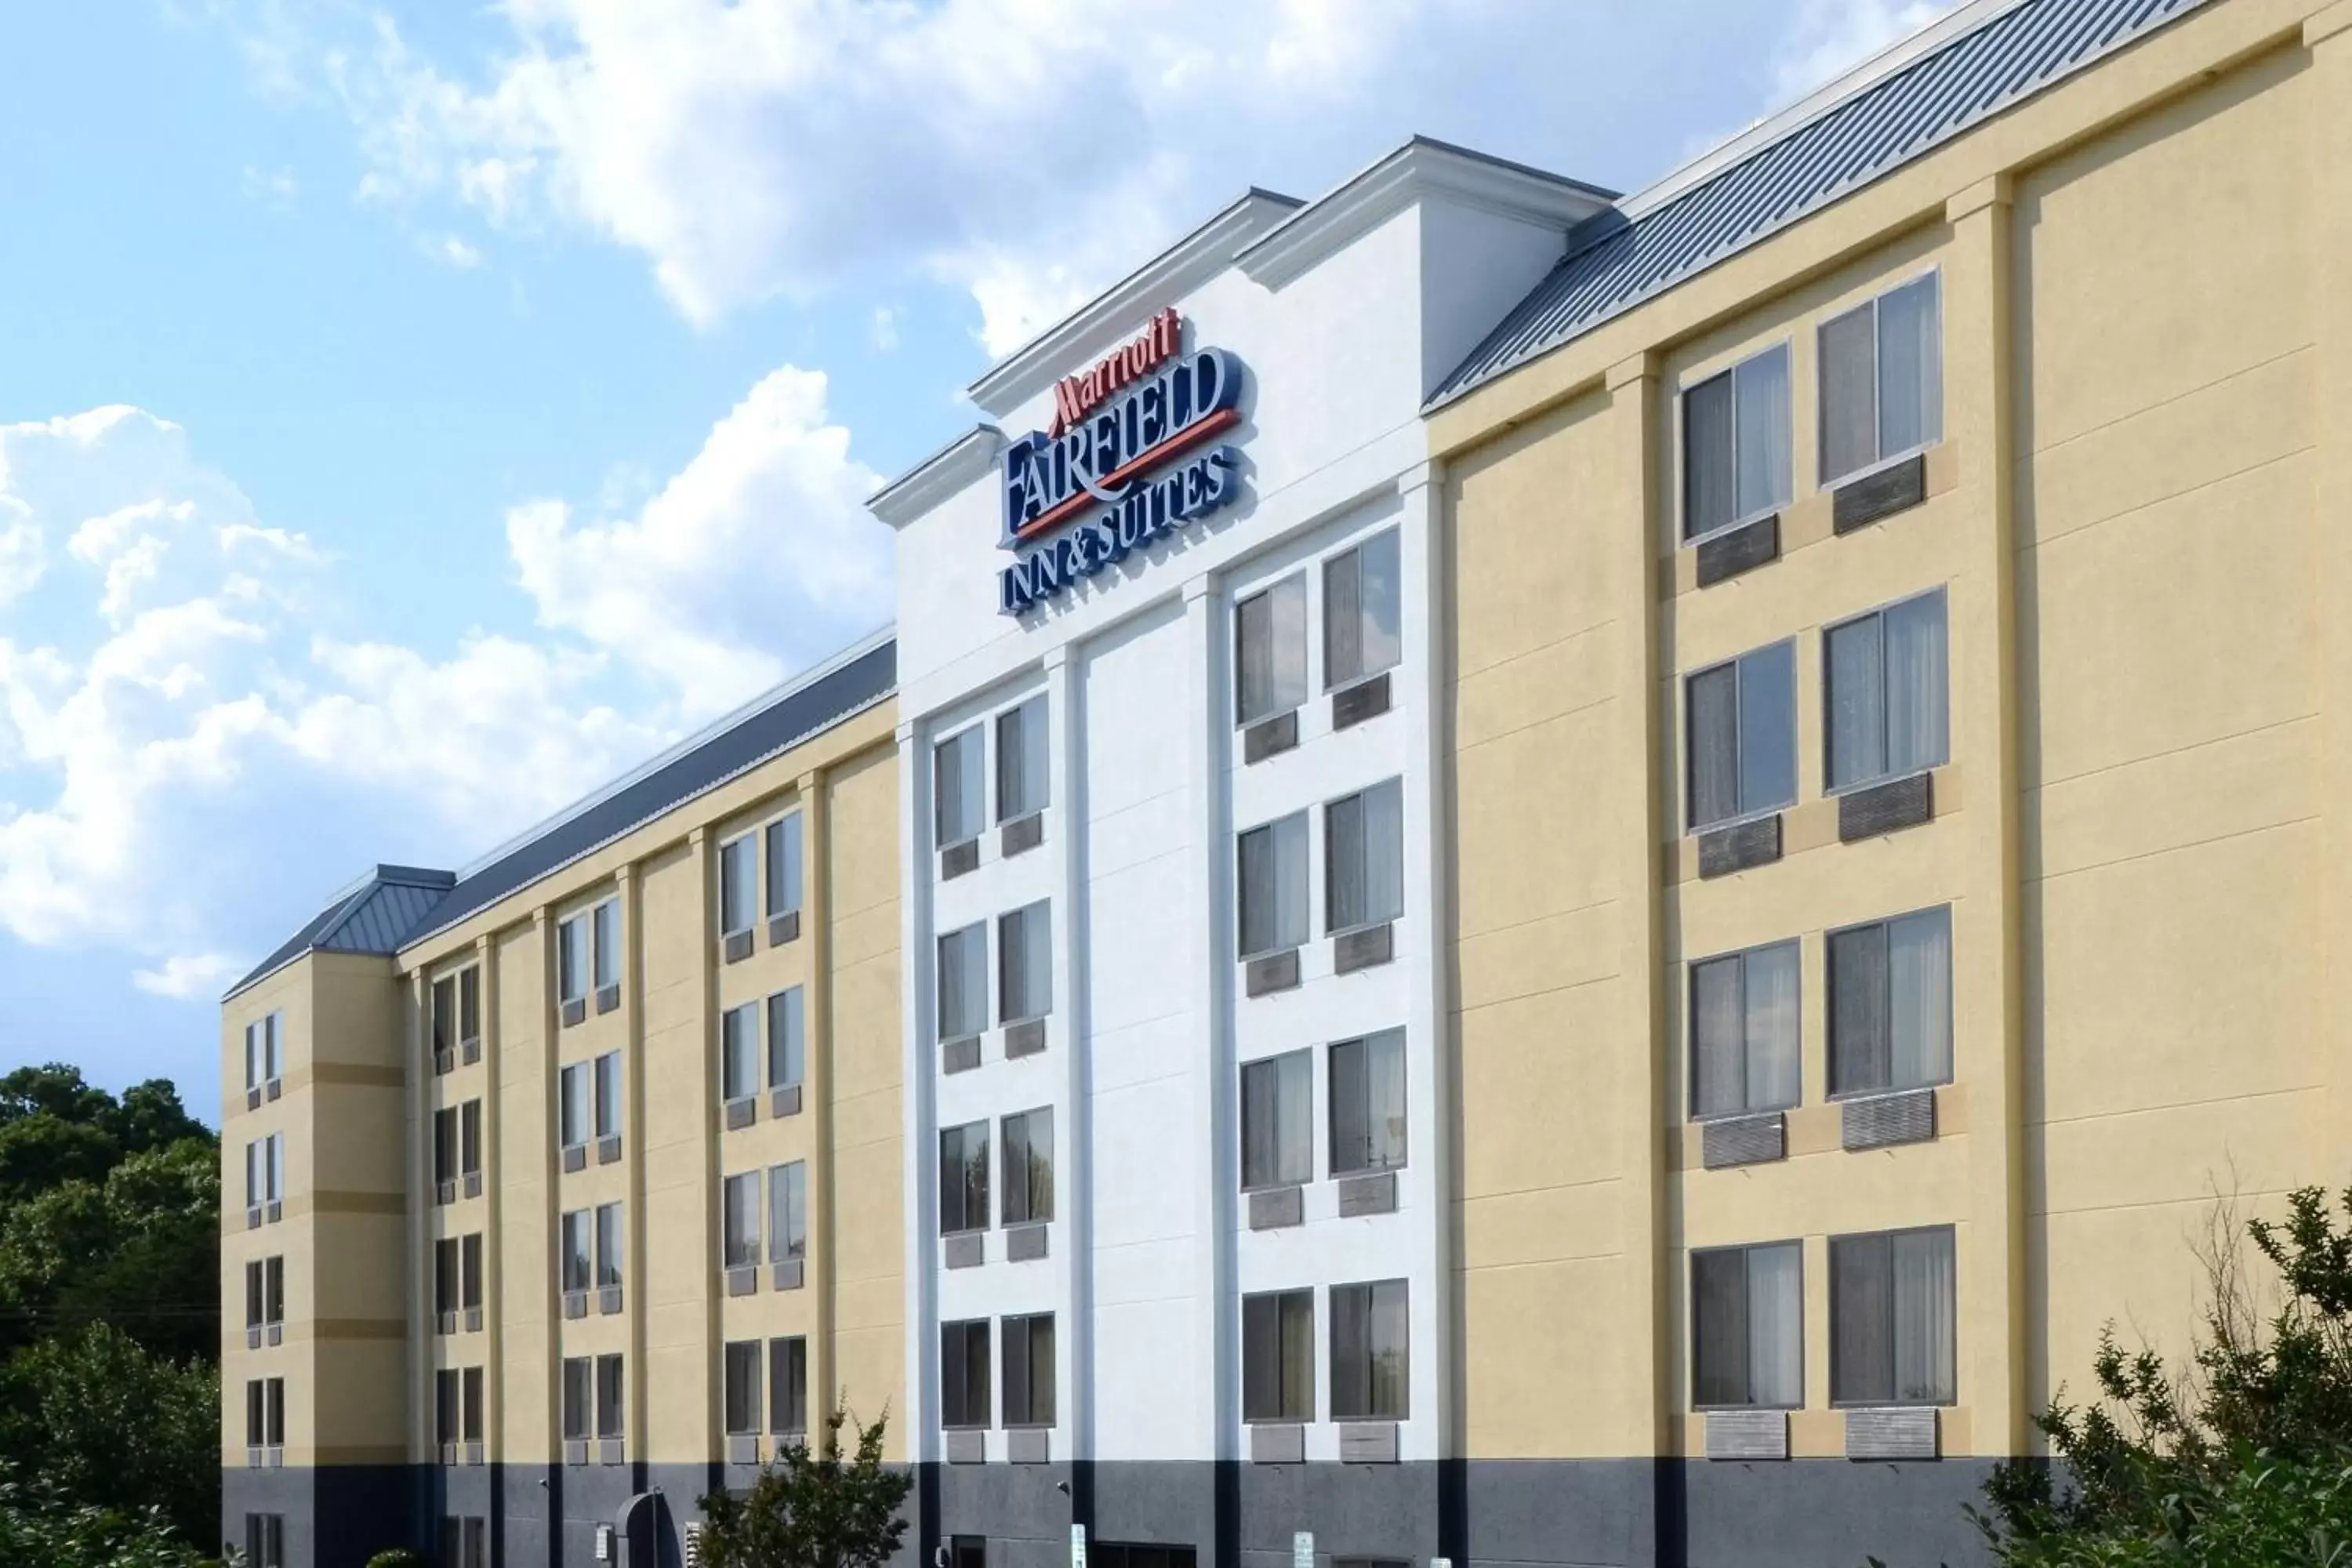 Property Building in Fairfield Inn and Suites by Marriott Winston Salem/Hanes